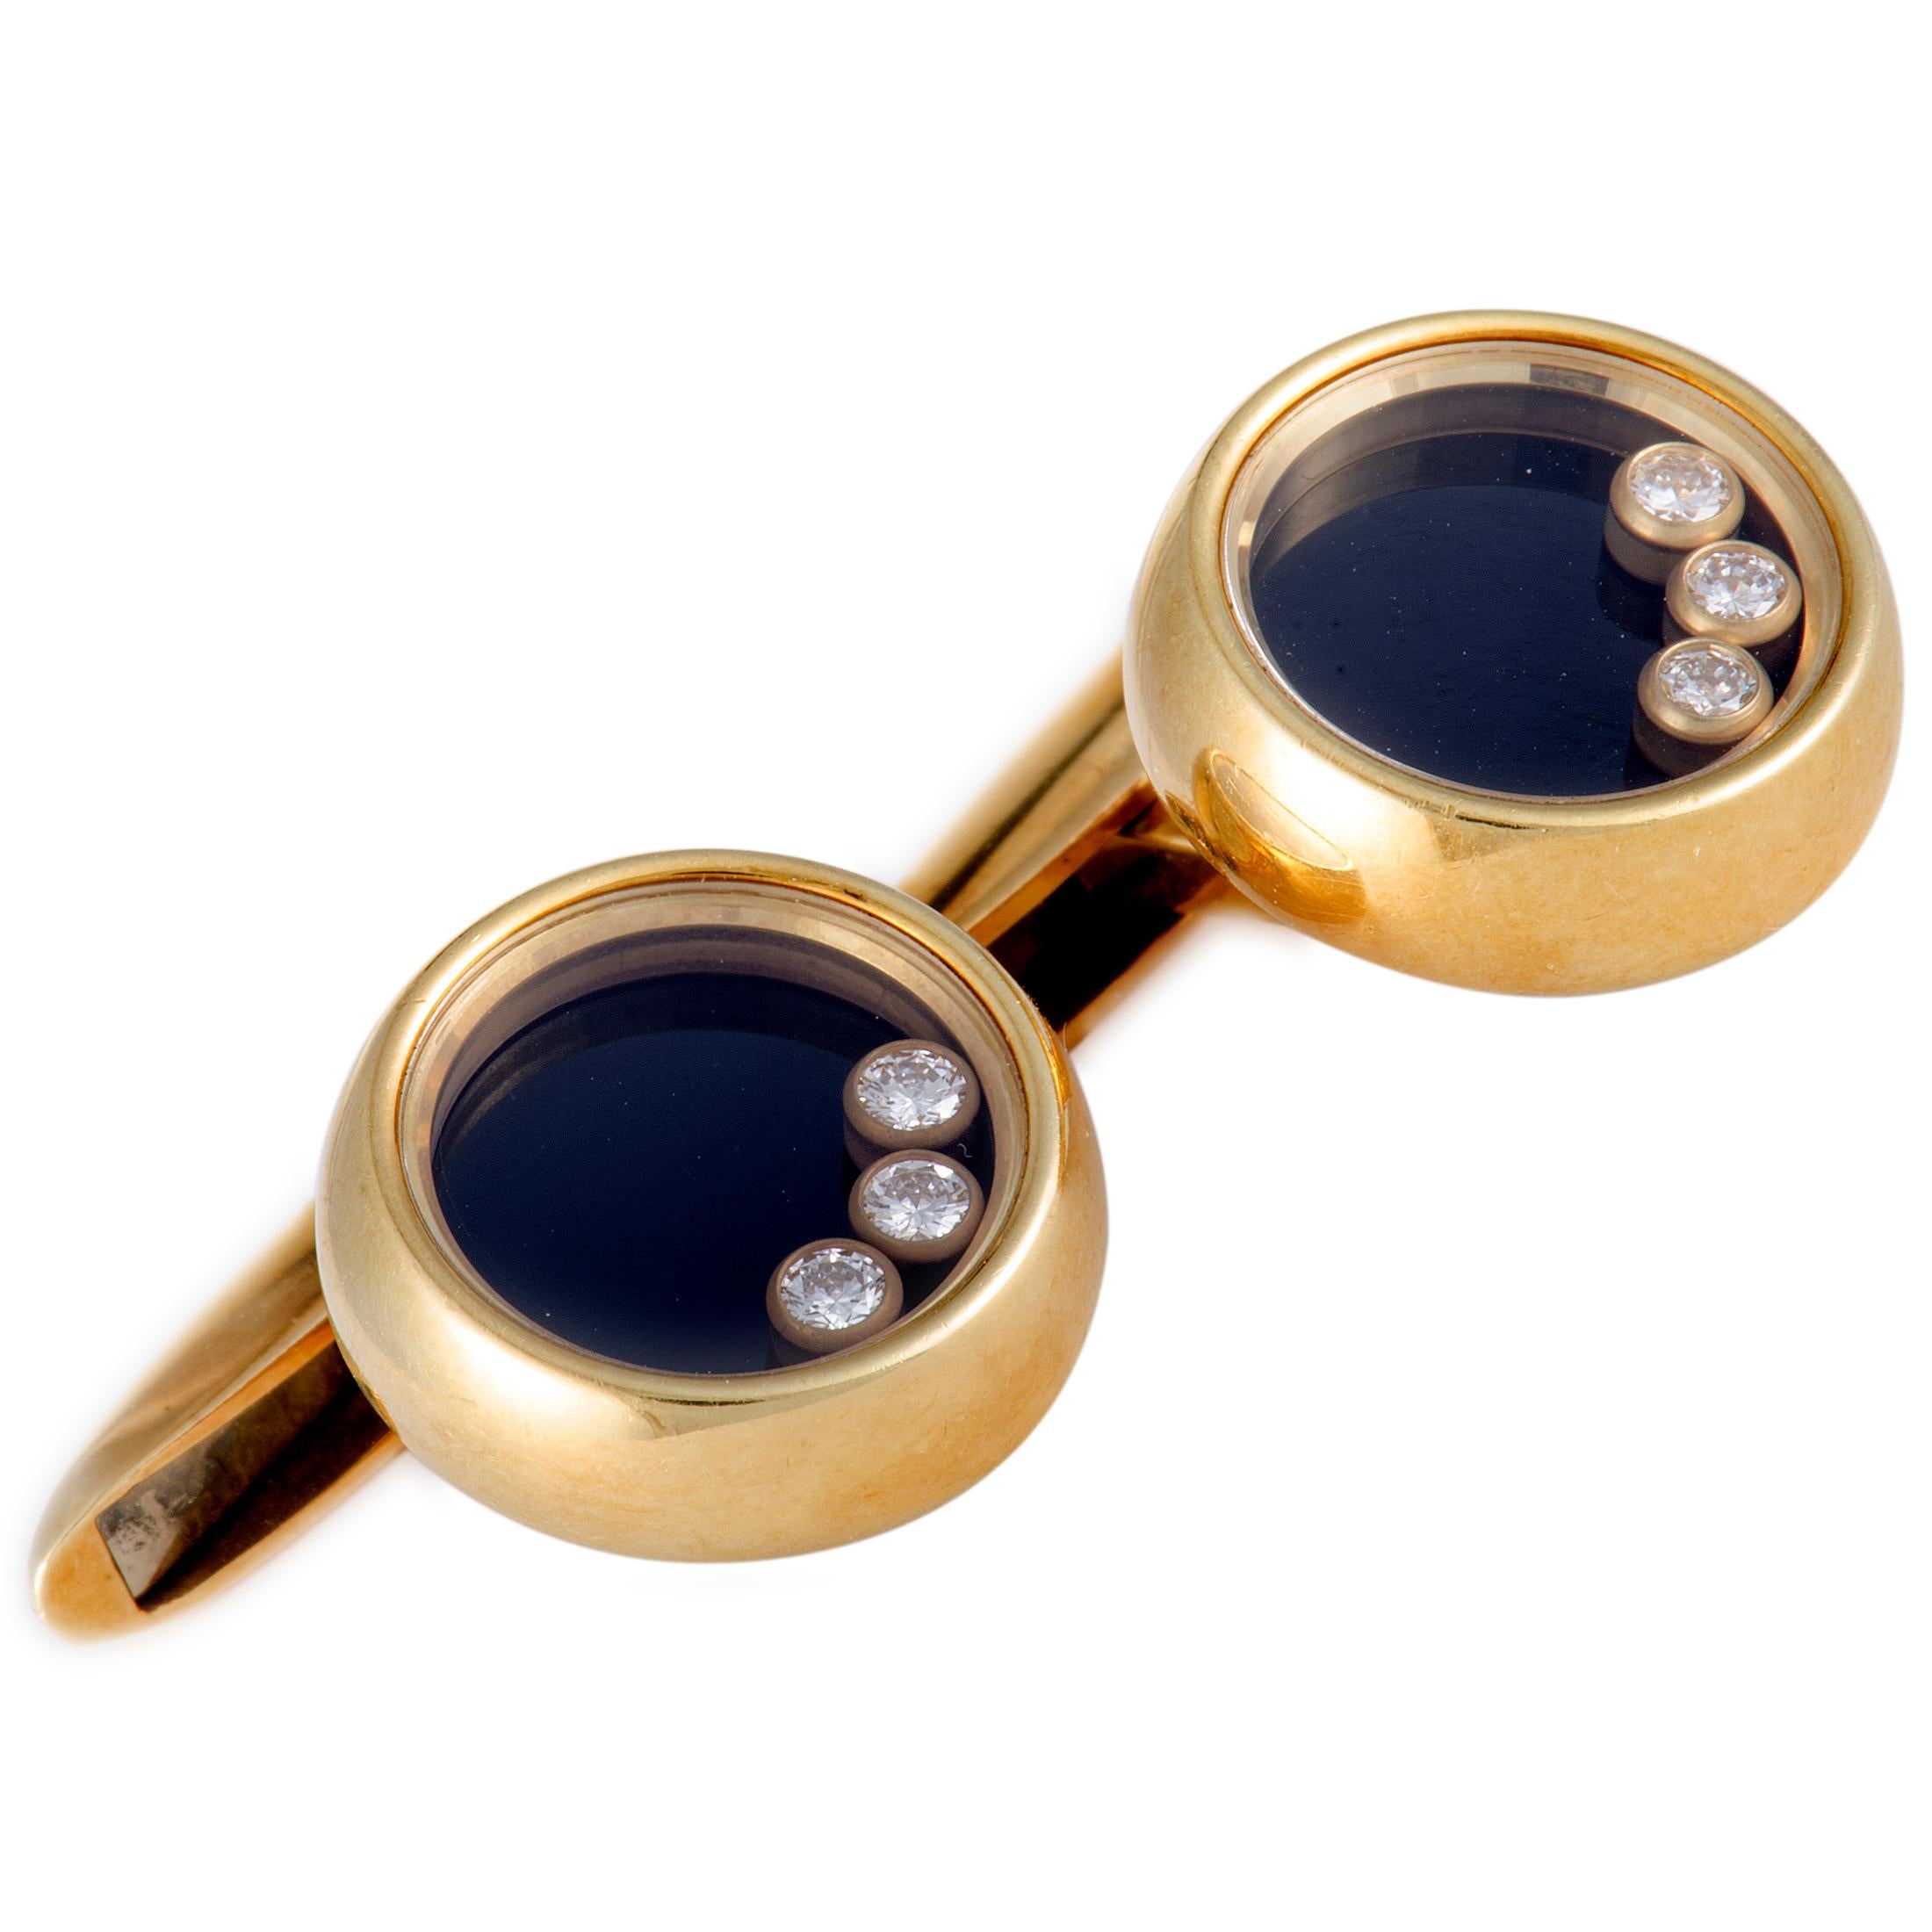 Presented within Chopard’s iconic “Happy diamonds” collection, these exquisite 18K yellow gold cufflinks feature an exceptionally elegant design, offering a look of utmost refinement. The cufflinks are decorated with striking onyx and with six